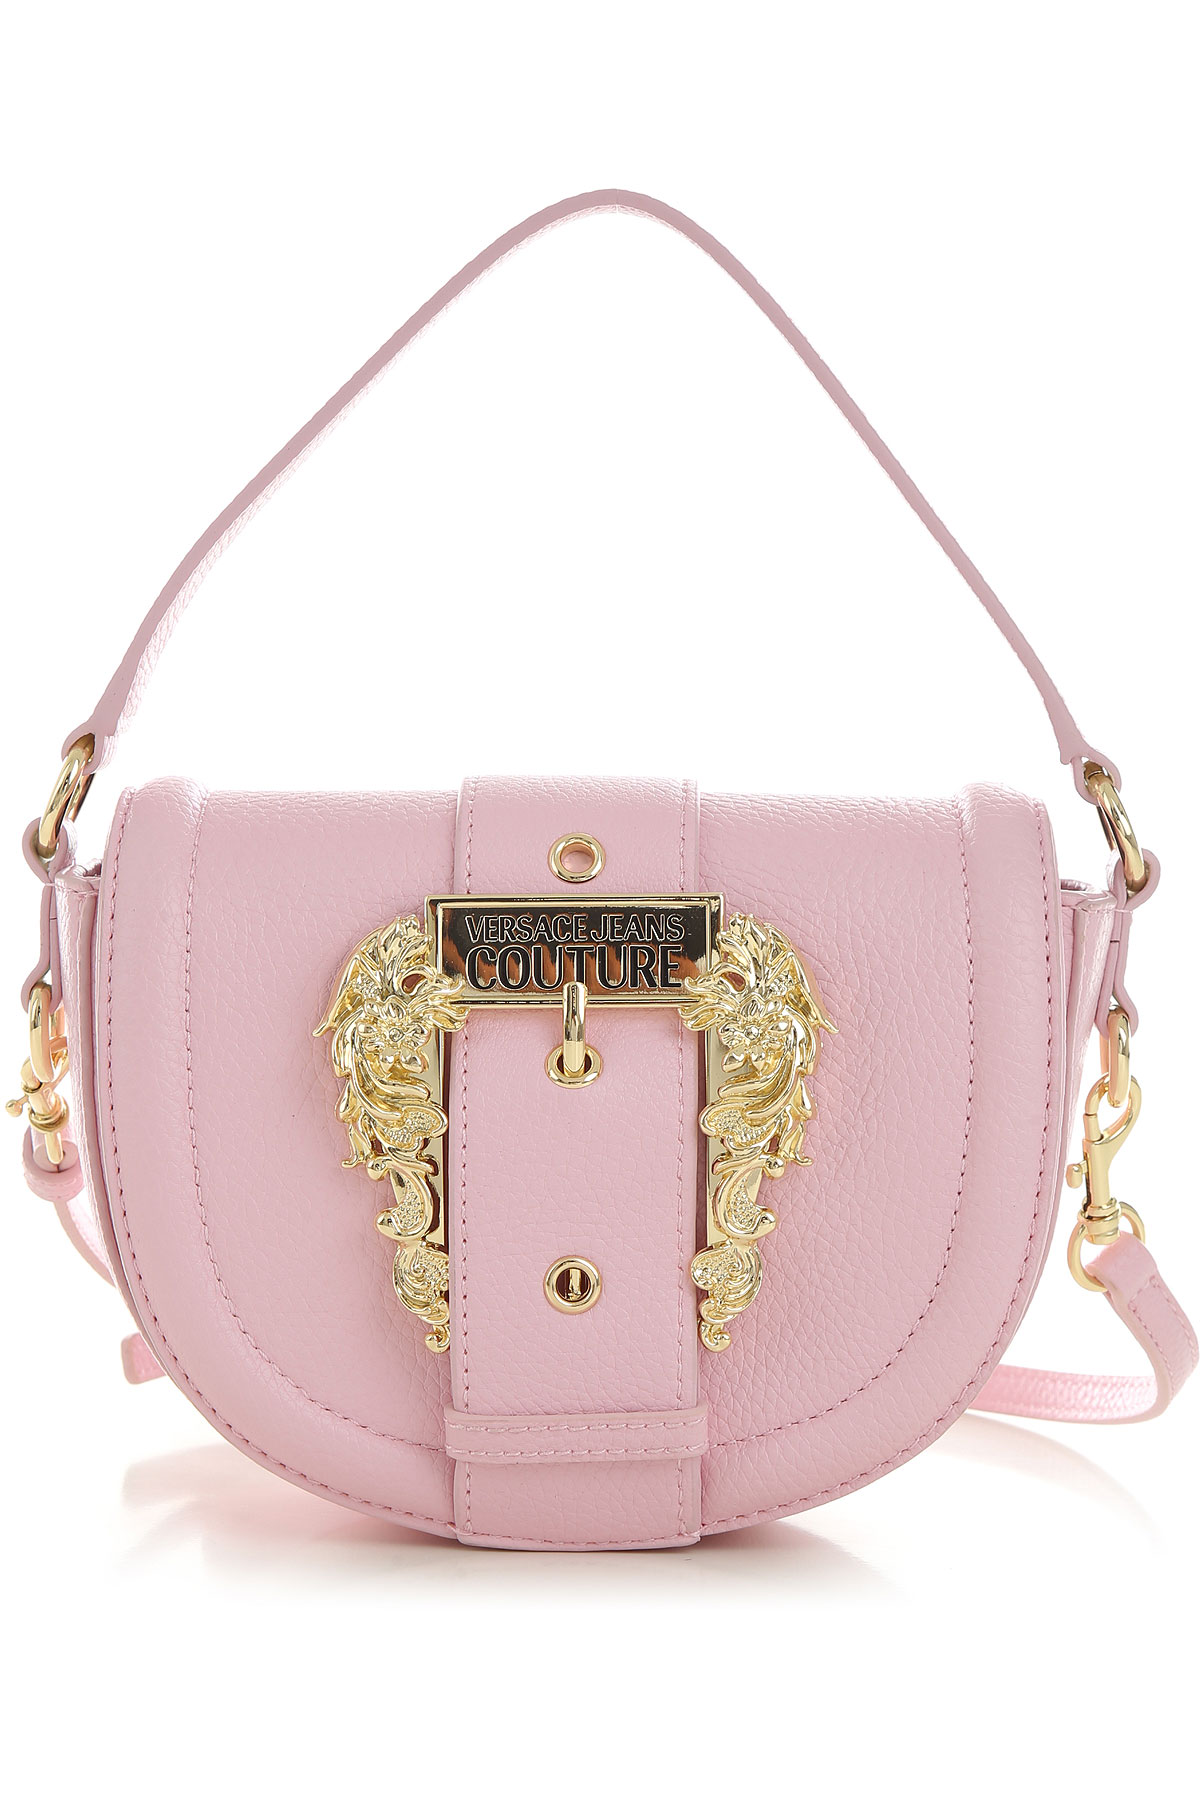 Handbags Versace Jeans Couture , Style code: 73va4bf2-zs413-439